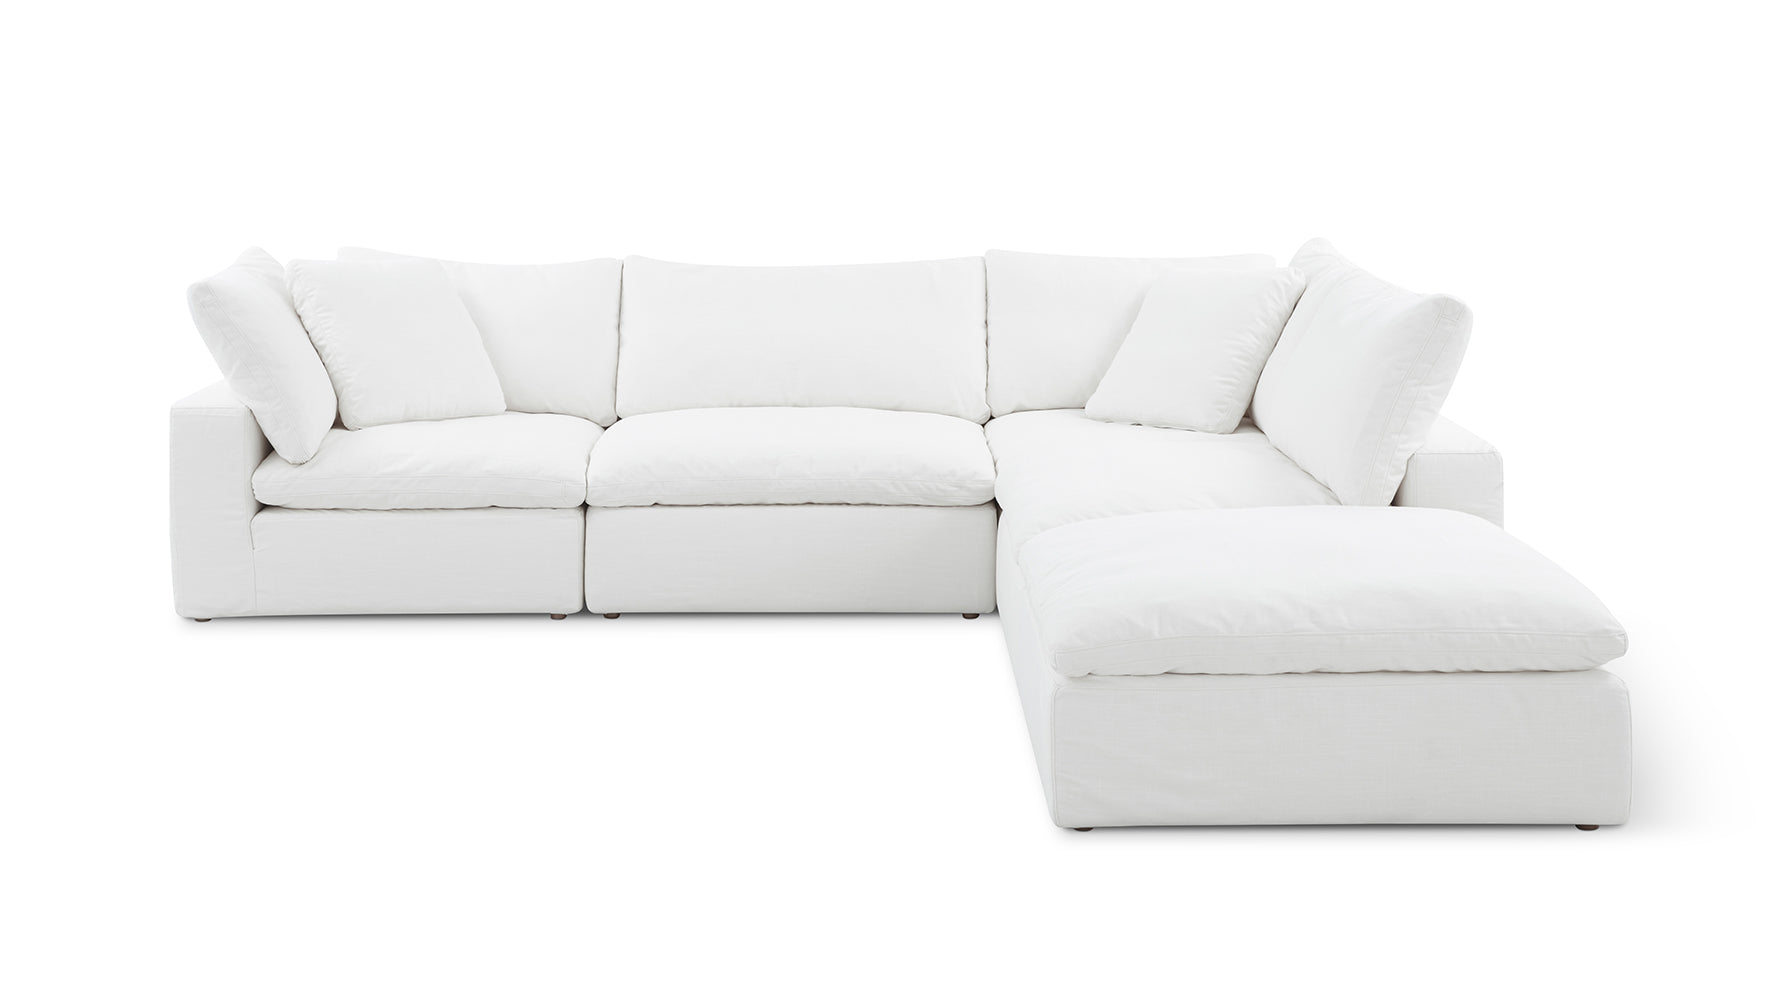 Movie Night™ 5-Piece Modular Sectional, Large, Brie - Image 1